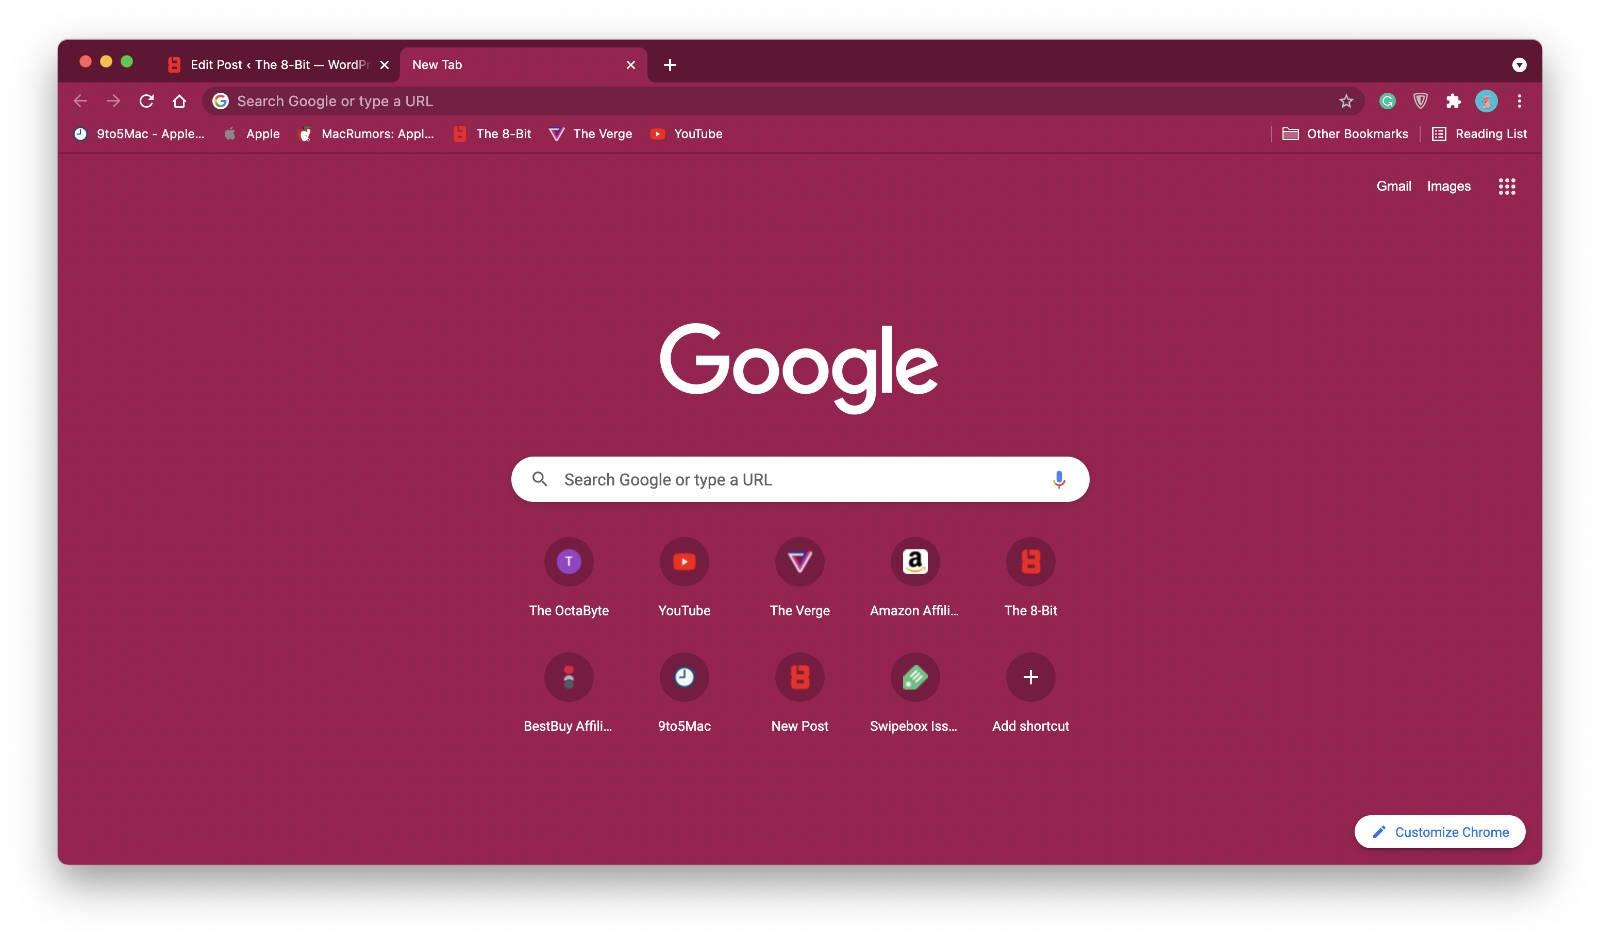 Chrome's window themed with red color.